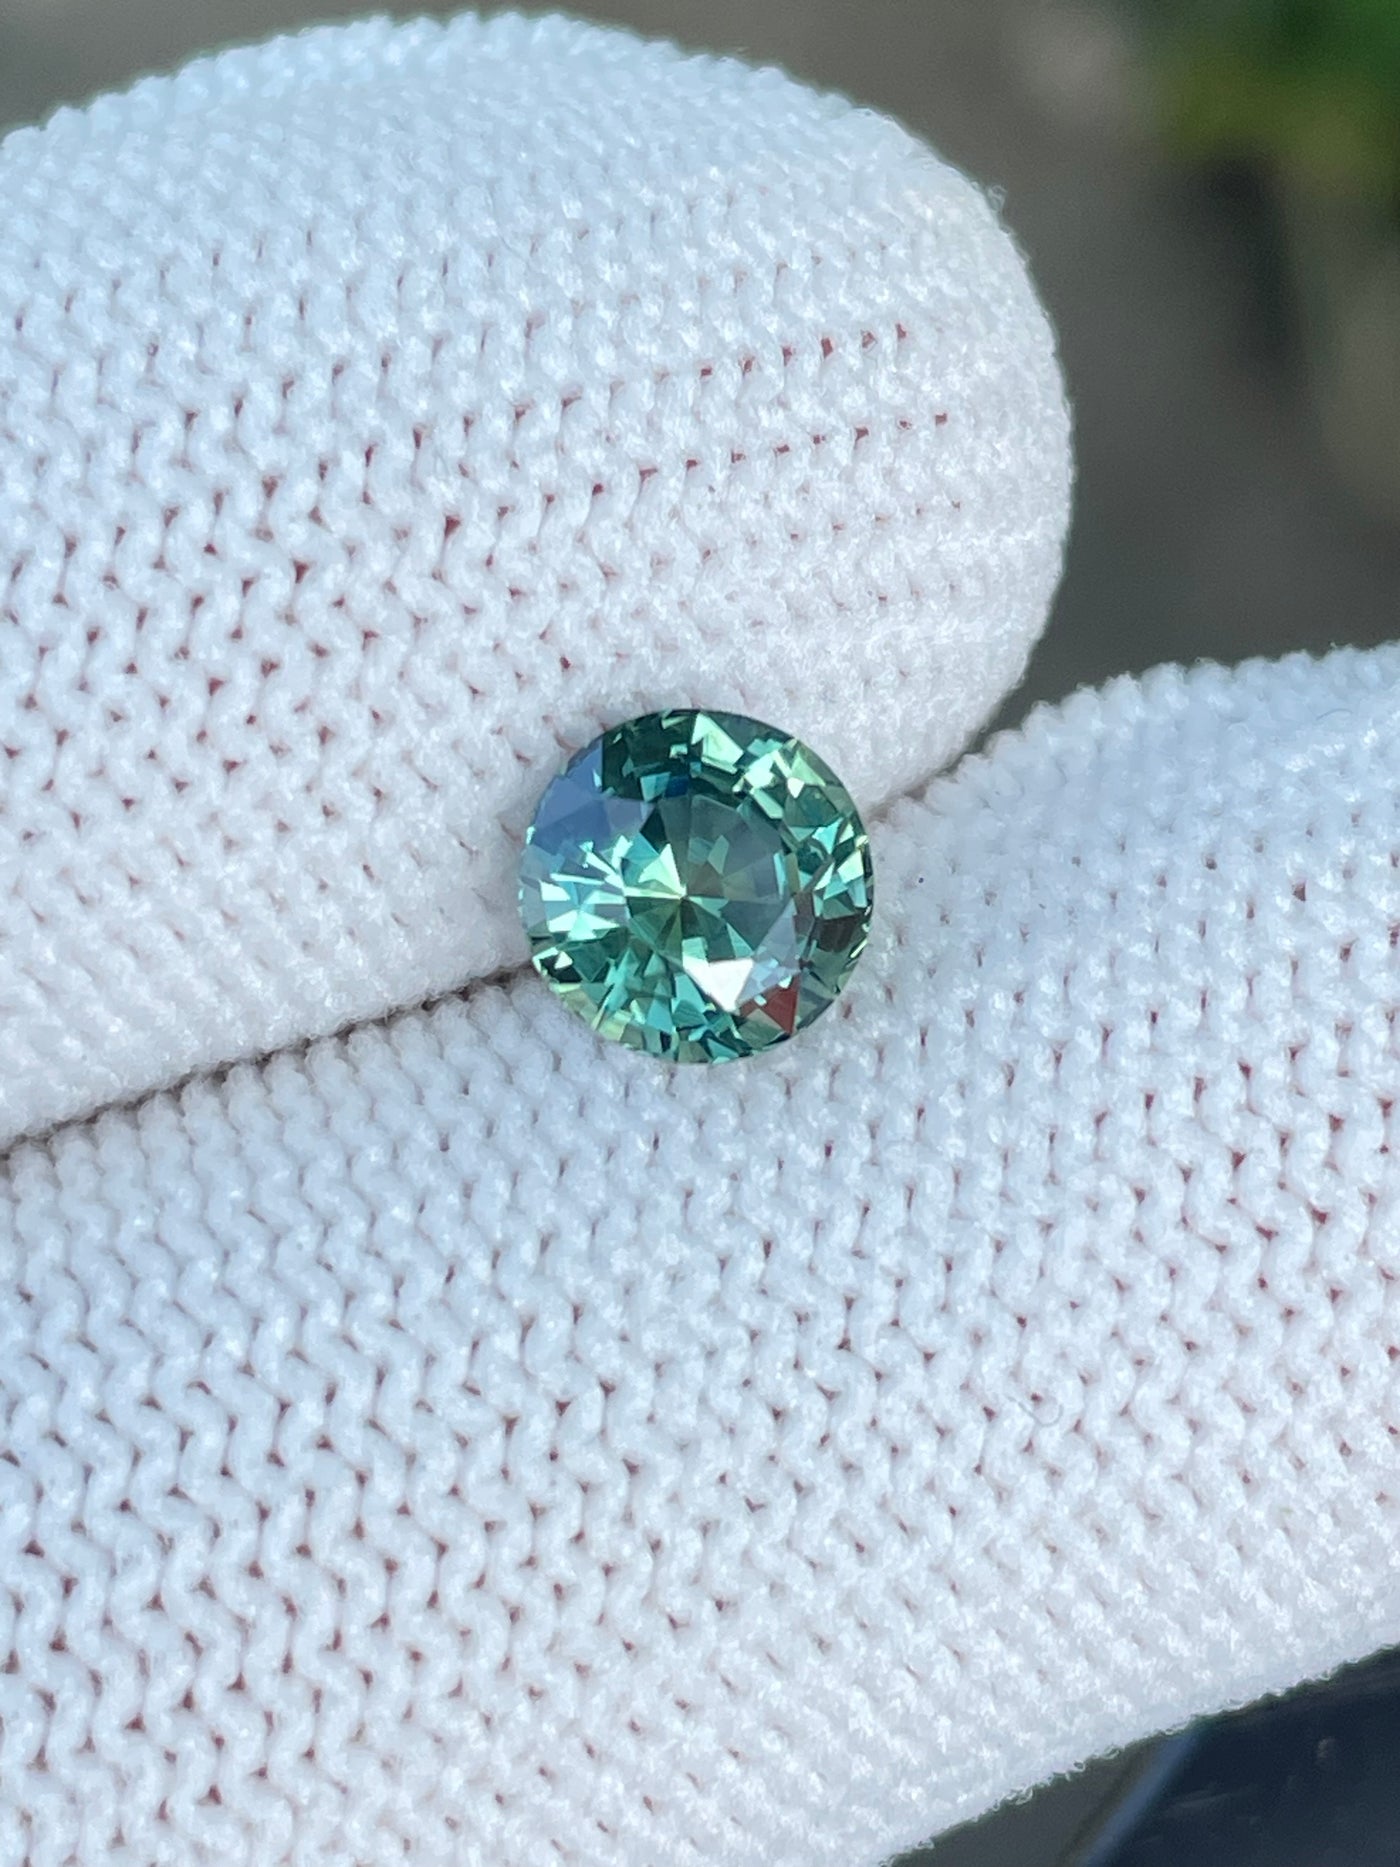 Teal Sapphire 1.28 CT